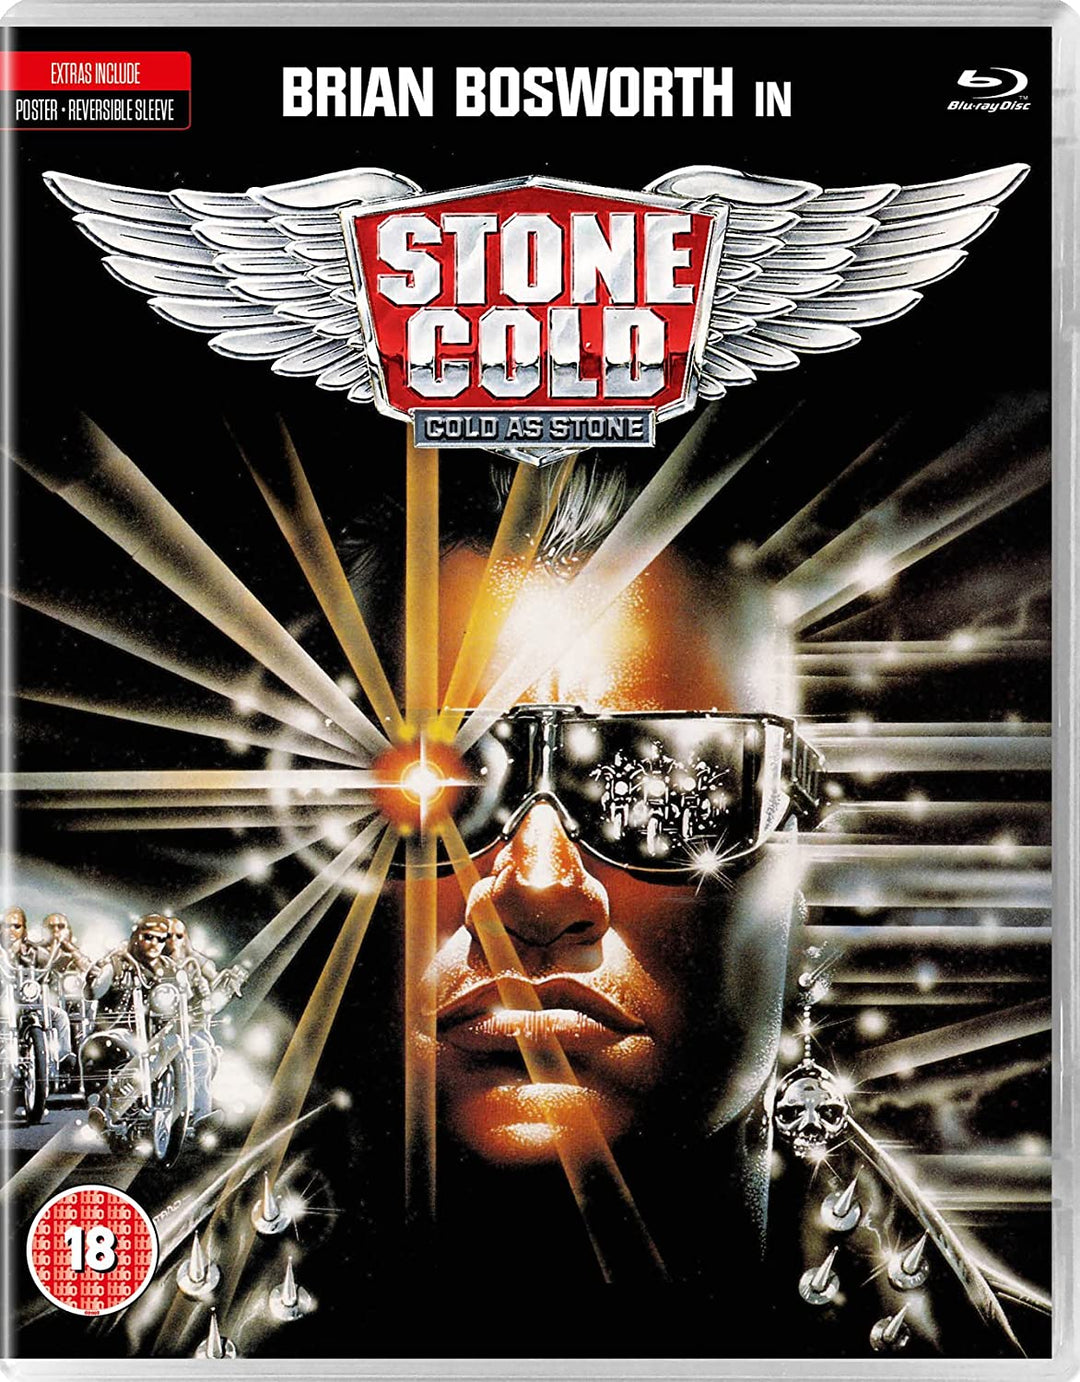 Stone Cold - Action [Blu-ray]